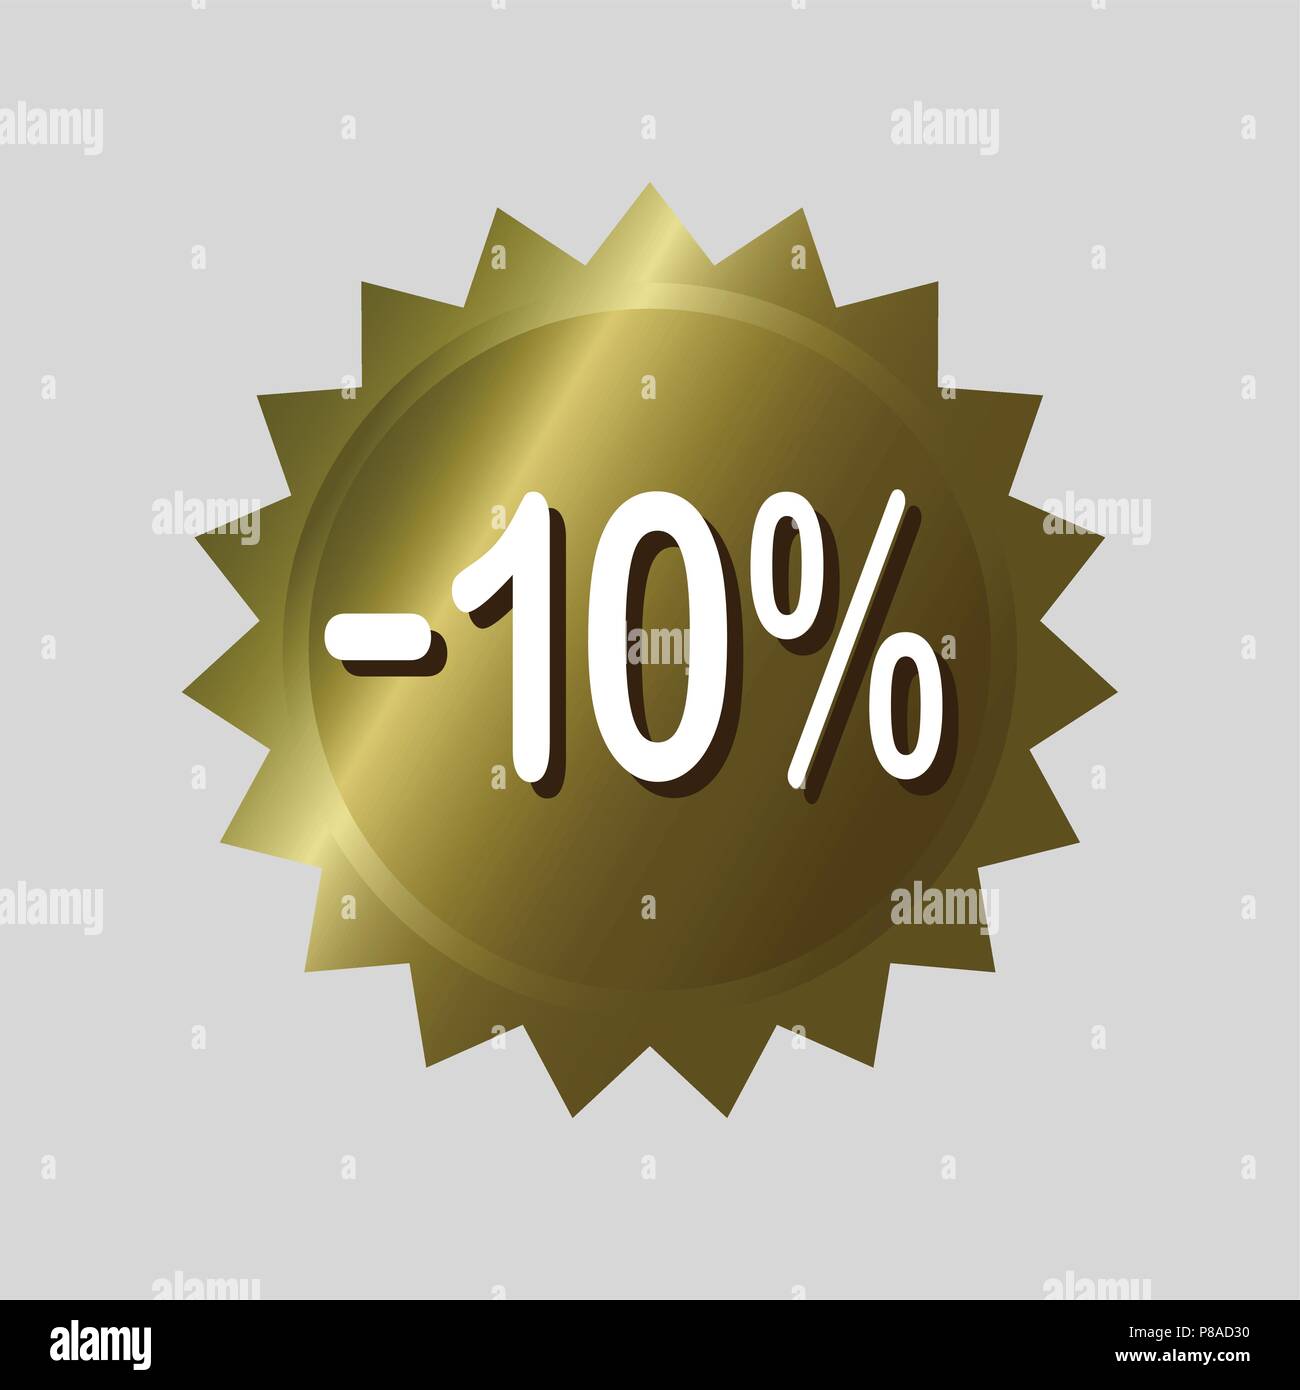 Price tag, '10% off' discount sticker. Golden vector label design on isolated background. Stock Vector